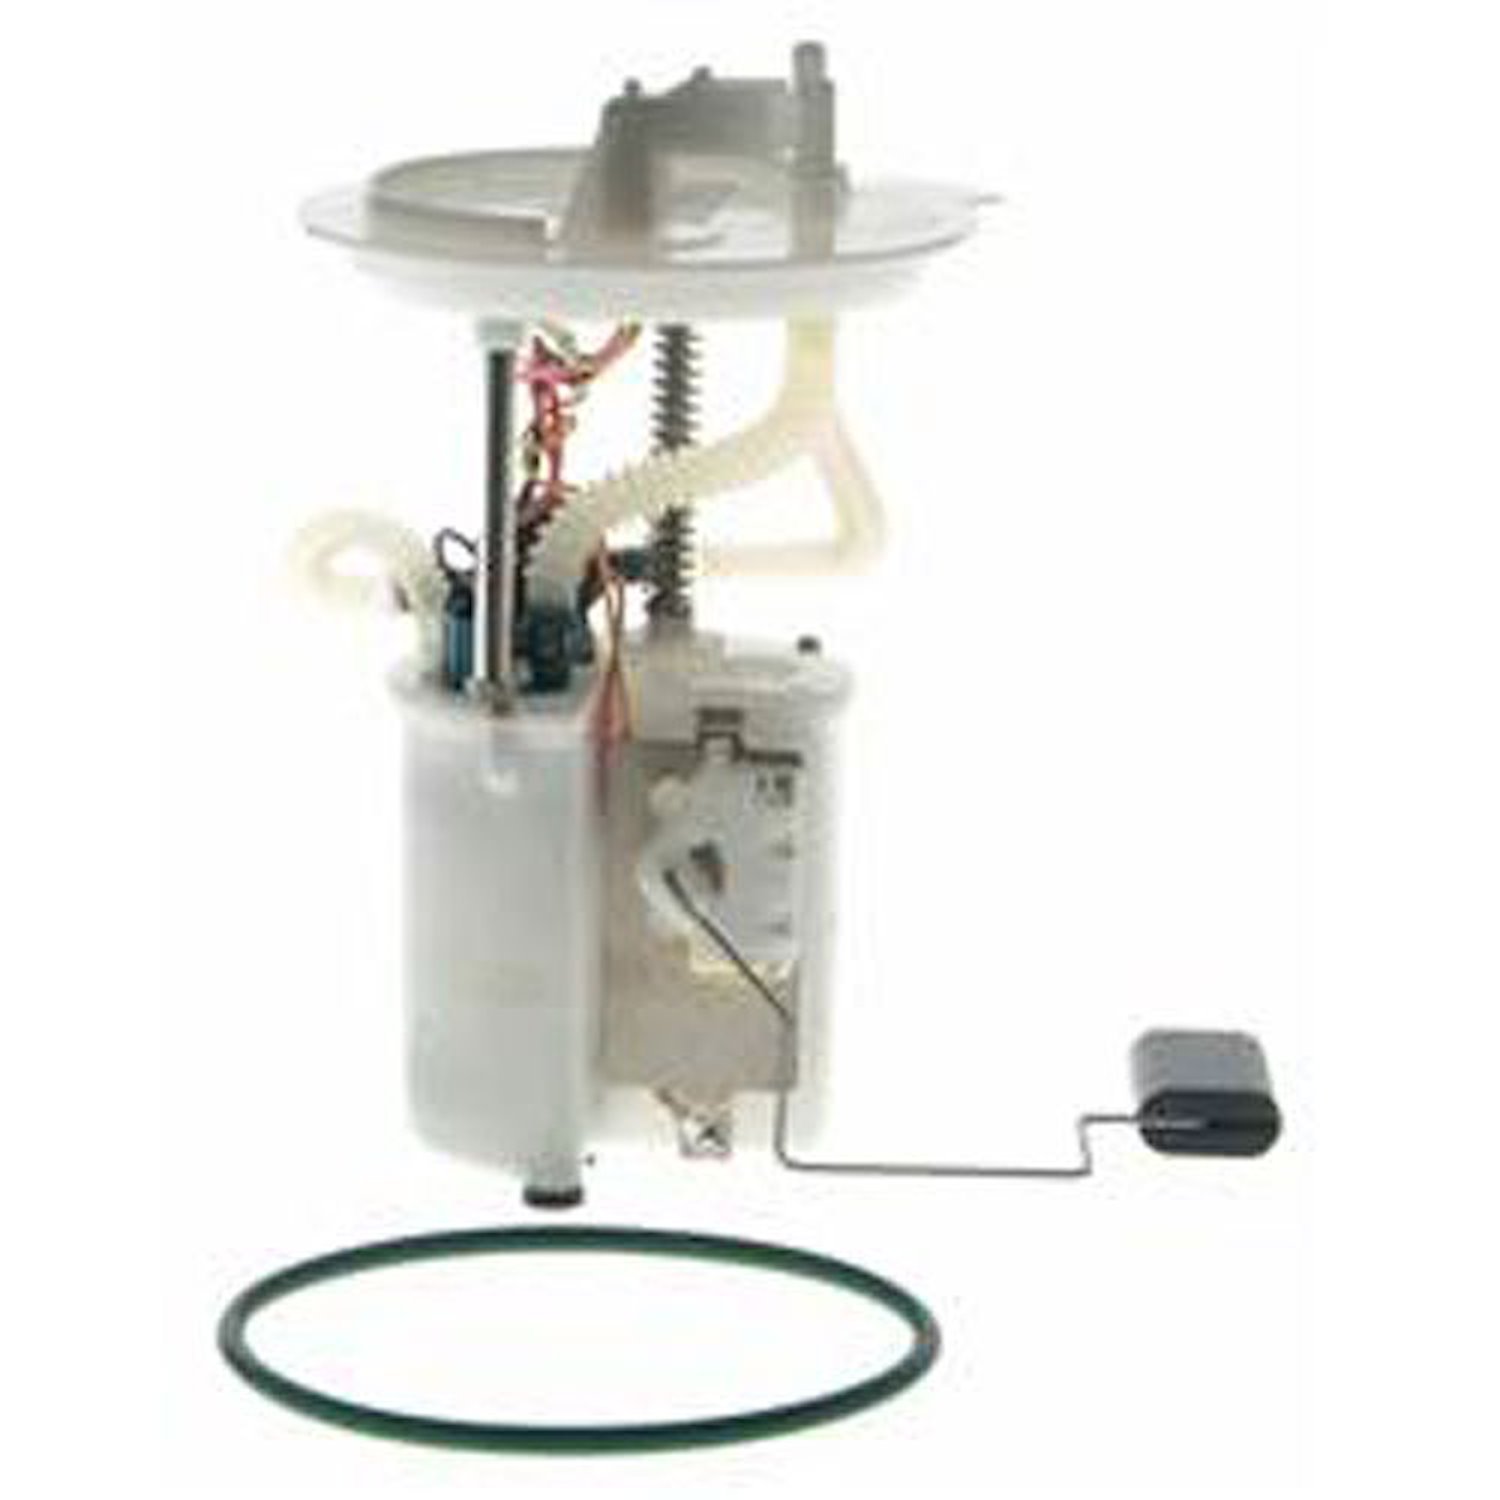 OE Ford Replacement Electric Fuel Pump Module Assembly 2005-07 Ford Freestar 3.9L/4.2L V6